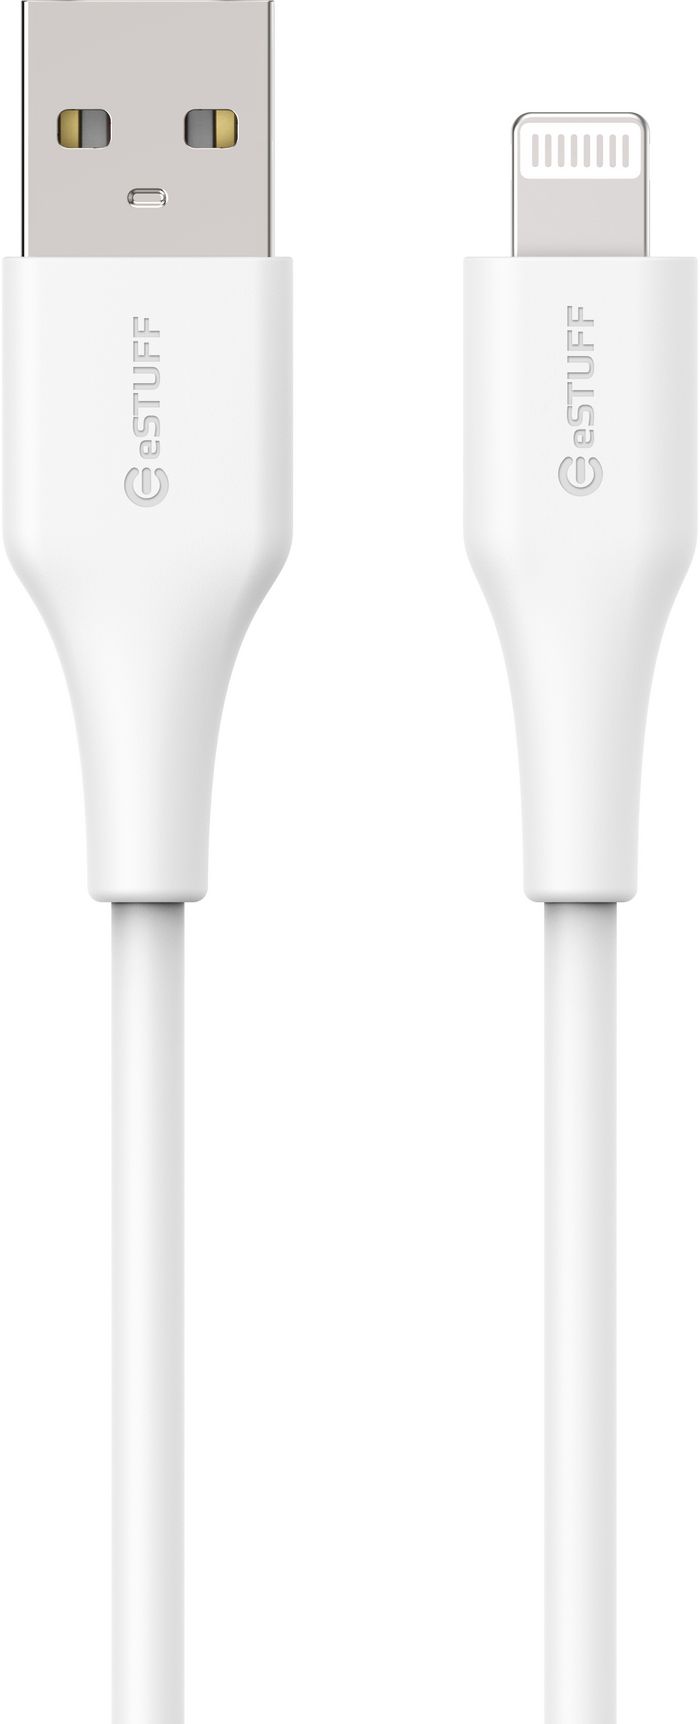 eSTUFF INFINITE Super Soft USB-A to Lightning Cable to Cable MFI 2m White - 100% Recycled Plastic - W128188390